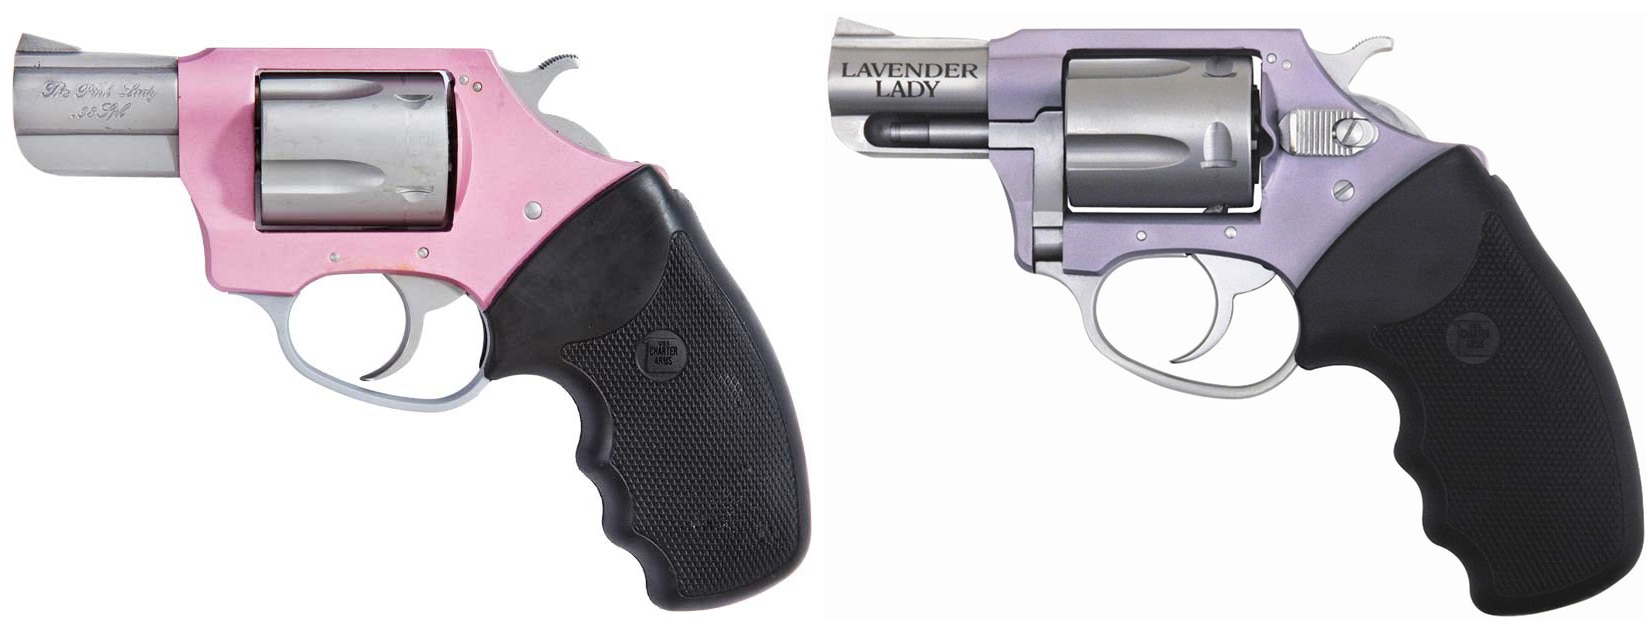 Charter Arms revolvers: The Pink lady, left, and The Lavender Lady. (Photo: Charter Arms)